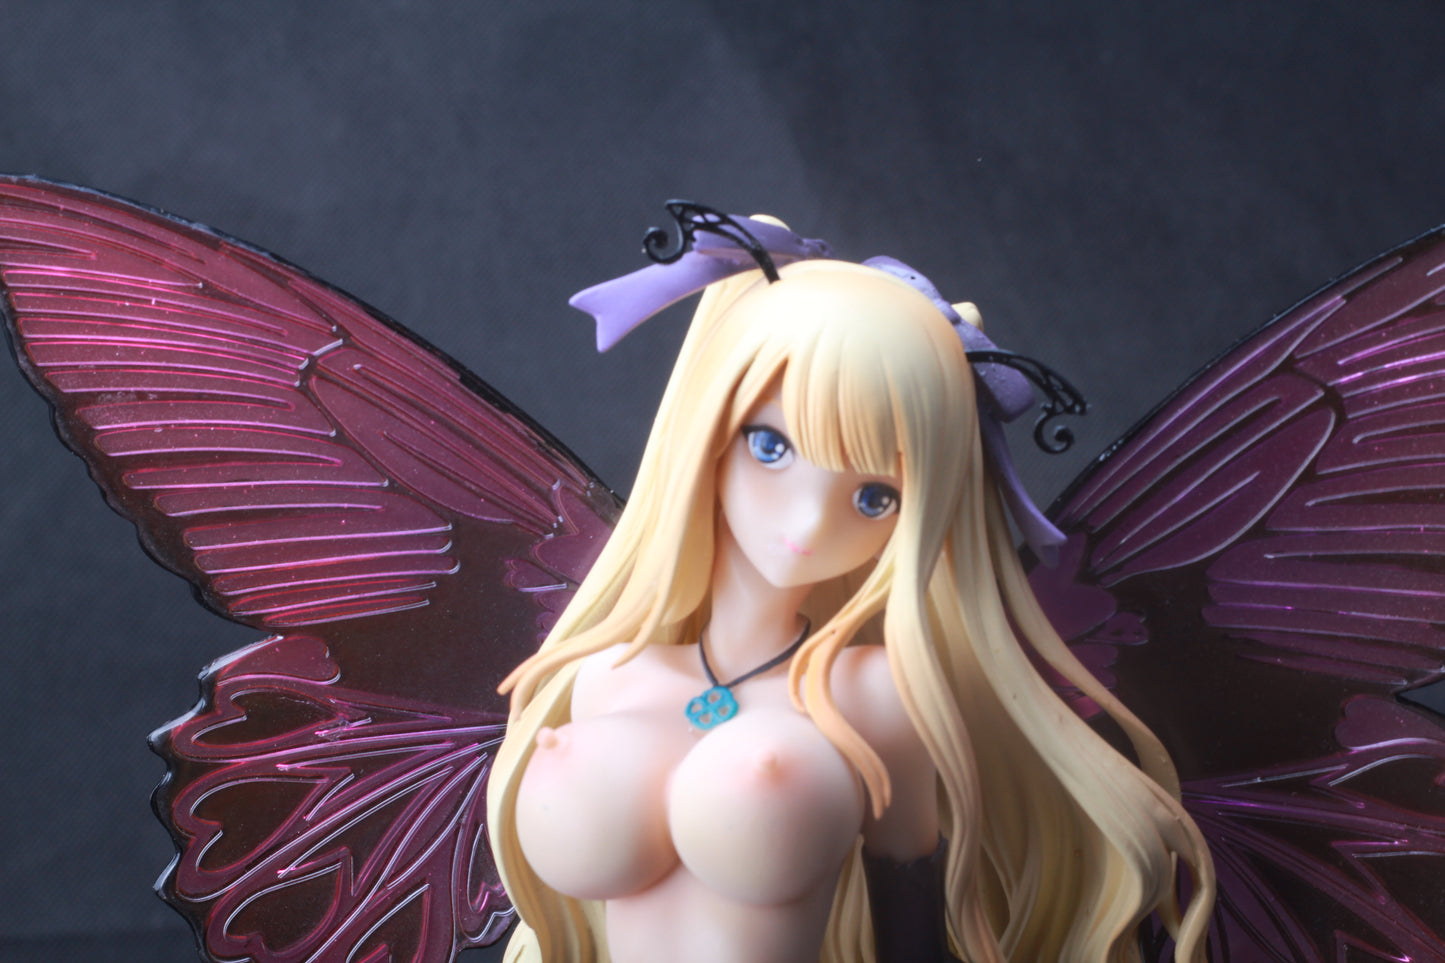 4-Leaves Tony Heroine Collection Fairy Garden sexy Annabel Butterfly Wings 1/6 anime girl figure